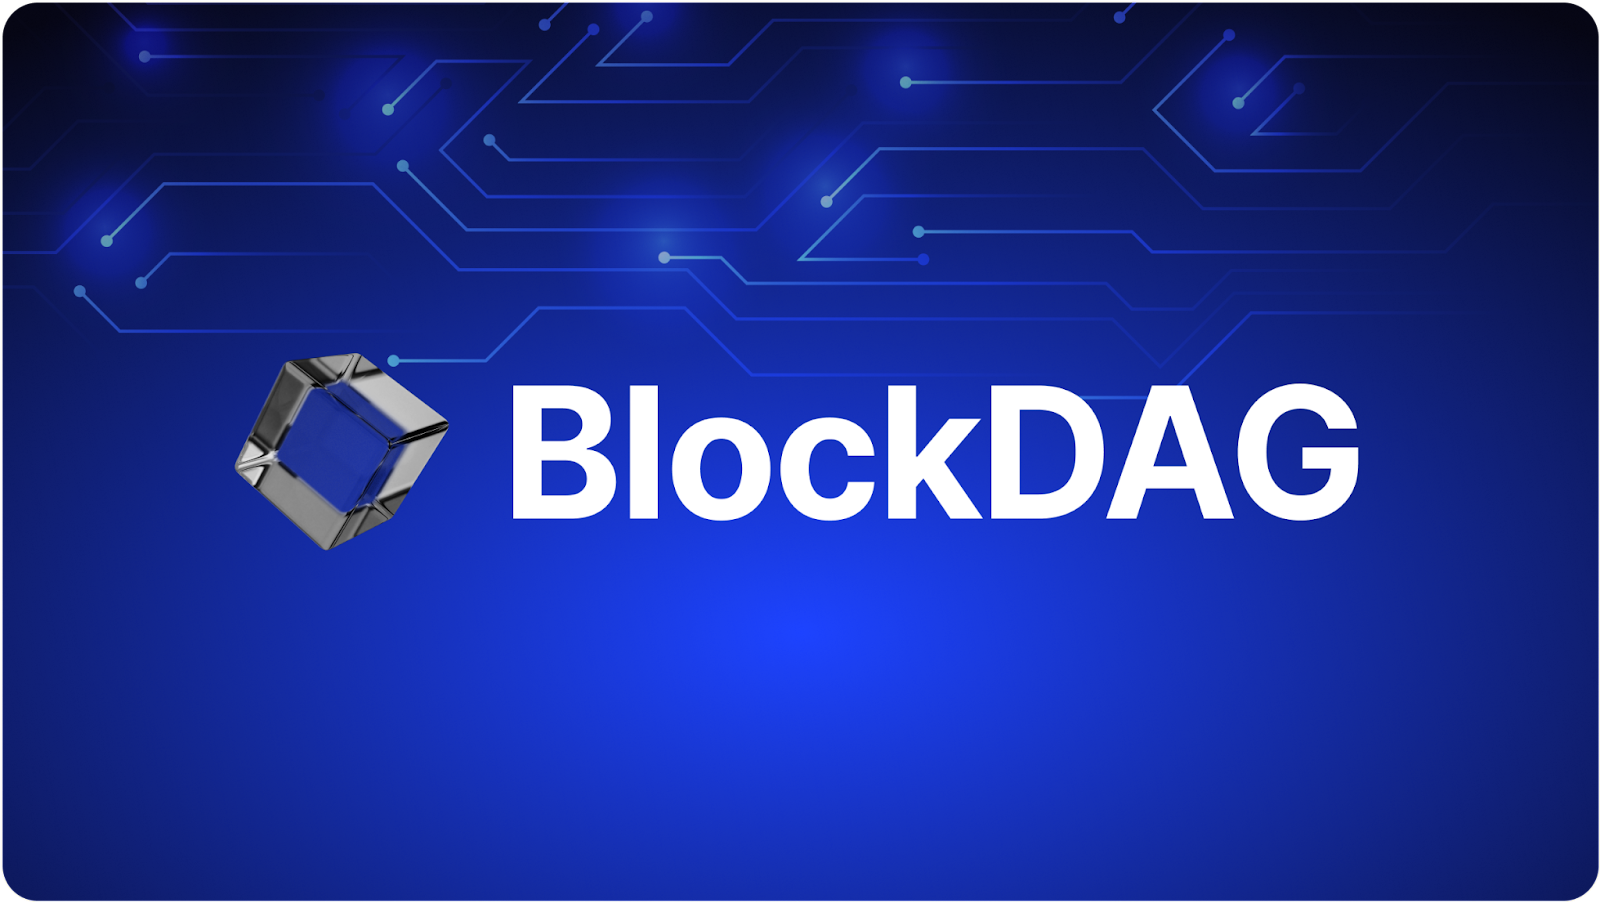 BlockDAG Expands Crypto Horizons, Launches Moon-Based Keynote; Are Kaspa and BounceBit Investors Joining?